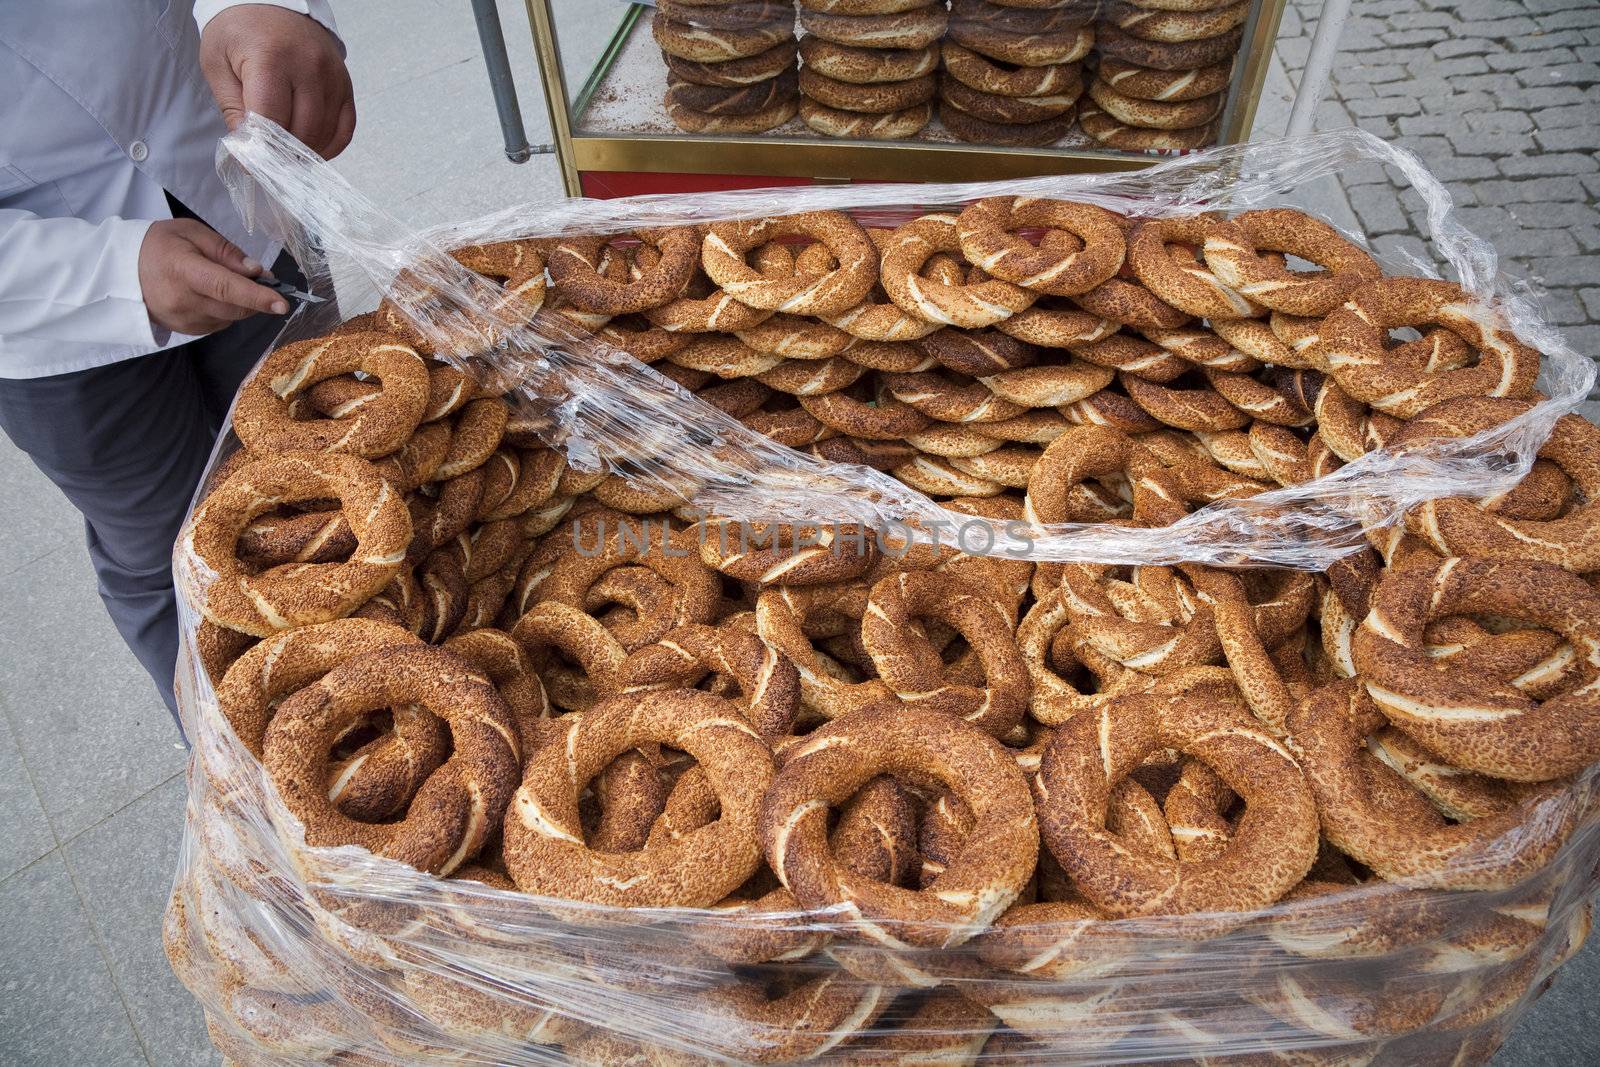 Simit vendor Istanbul by ABCDK